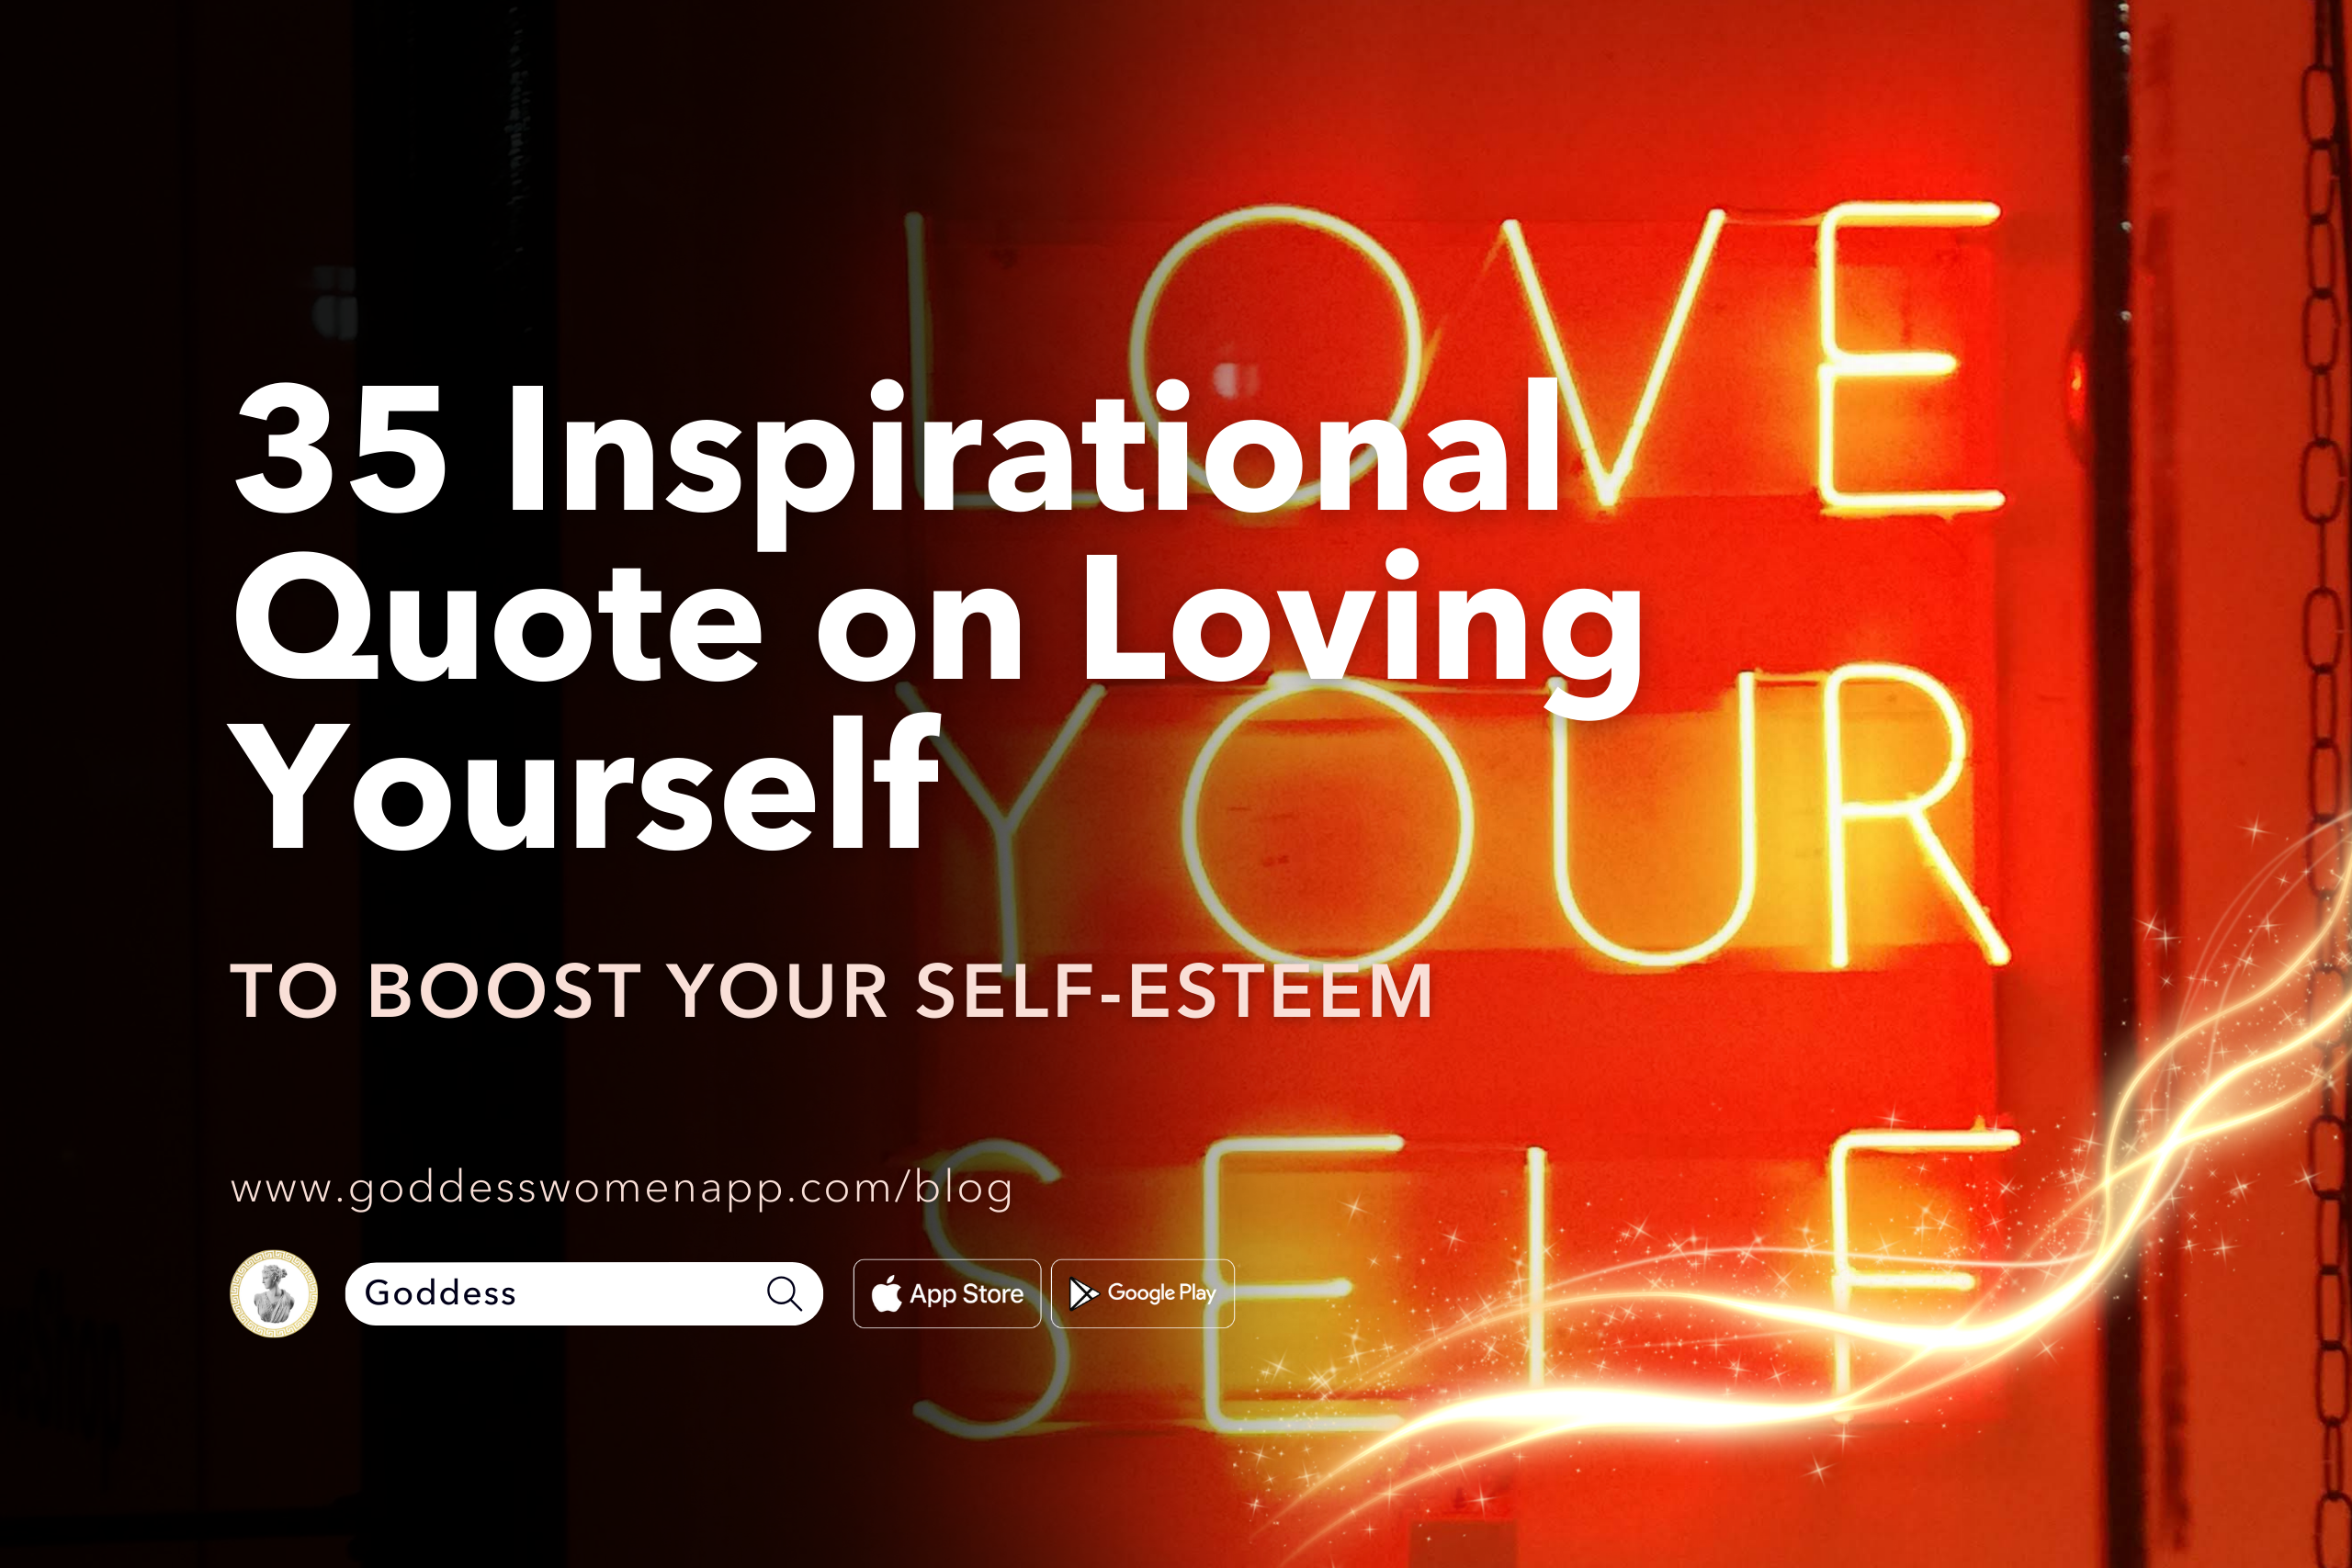 35 Inspirational Quote on Loving Yourself to Boost Your Self-Esteem